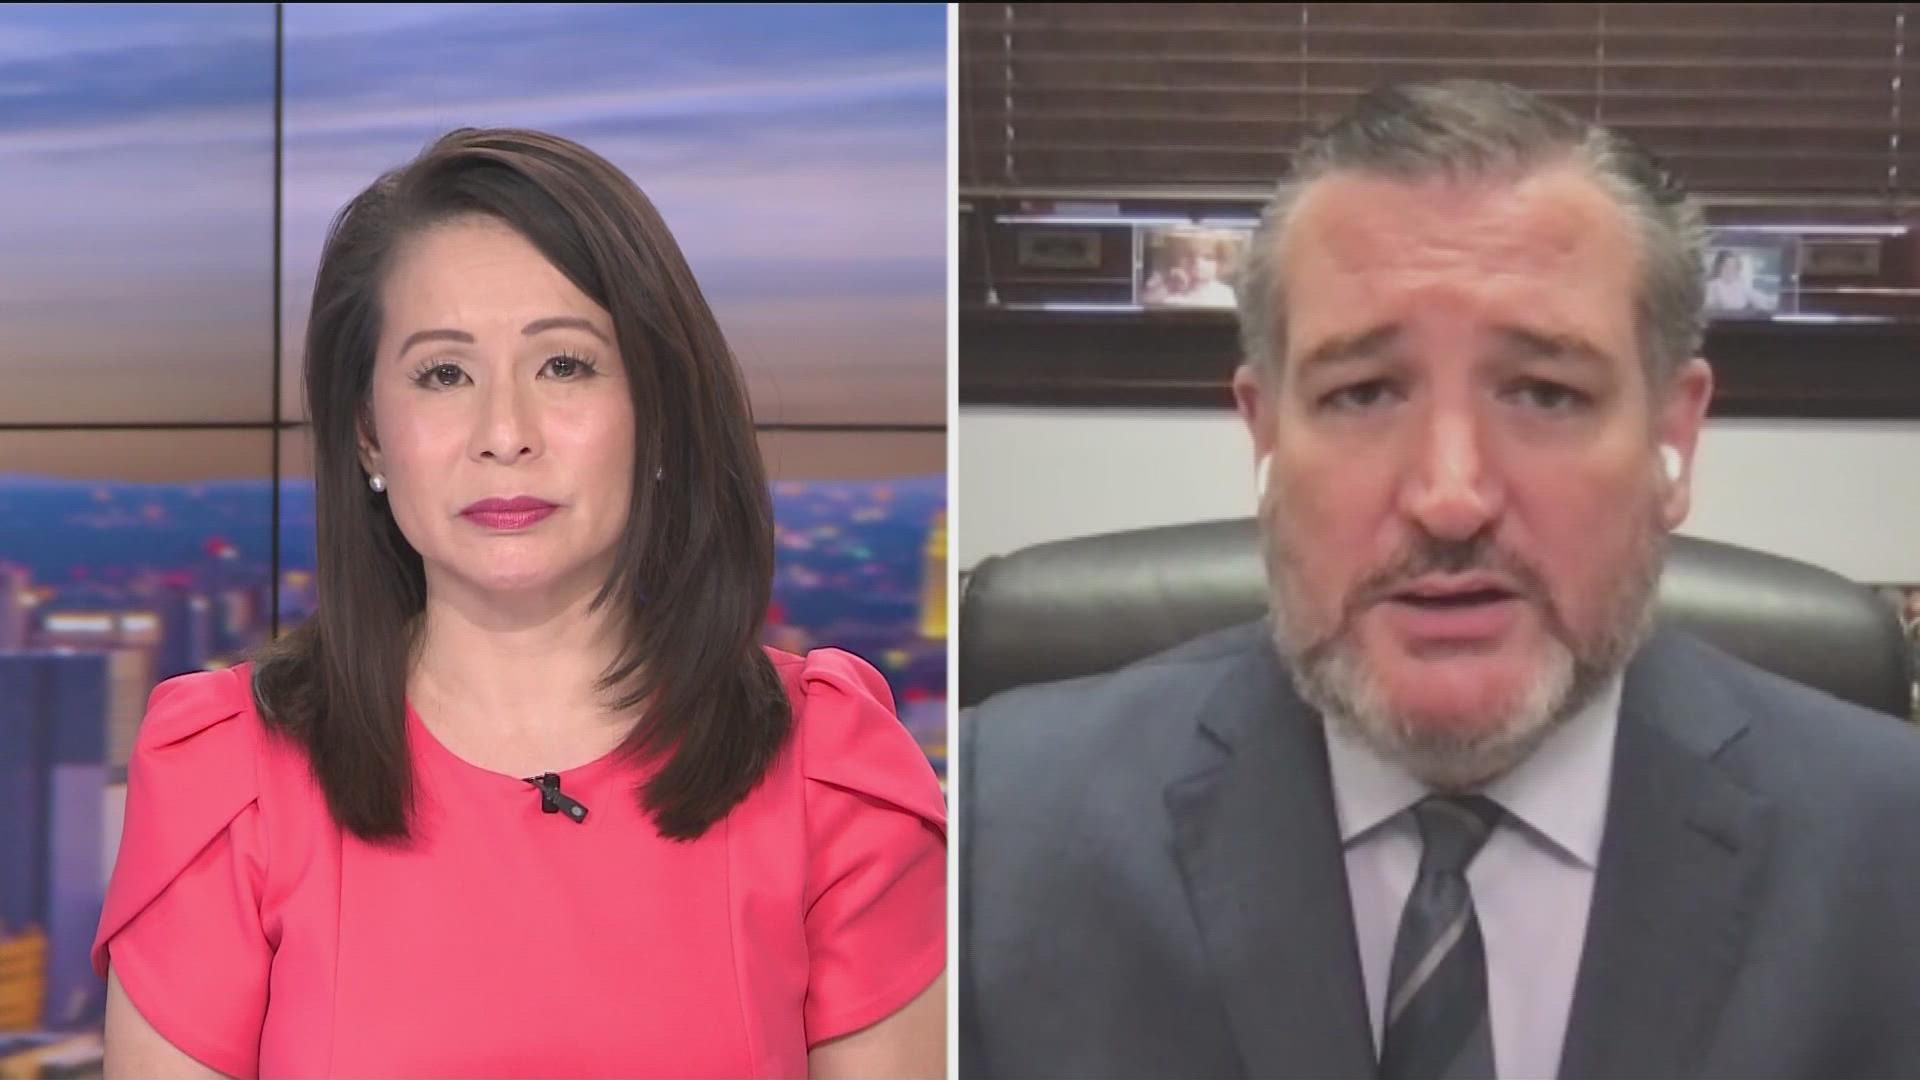 Sen. Ted Cruz joined KVUE Wednesday to discuss school safety across the state in the wake of the Uvalde school shooting.